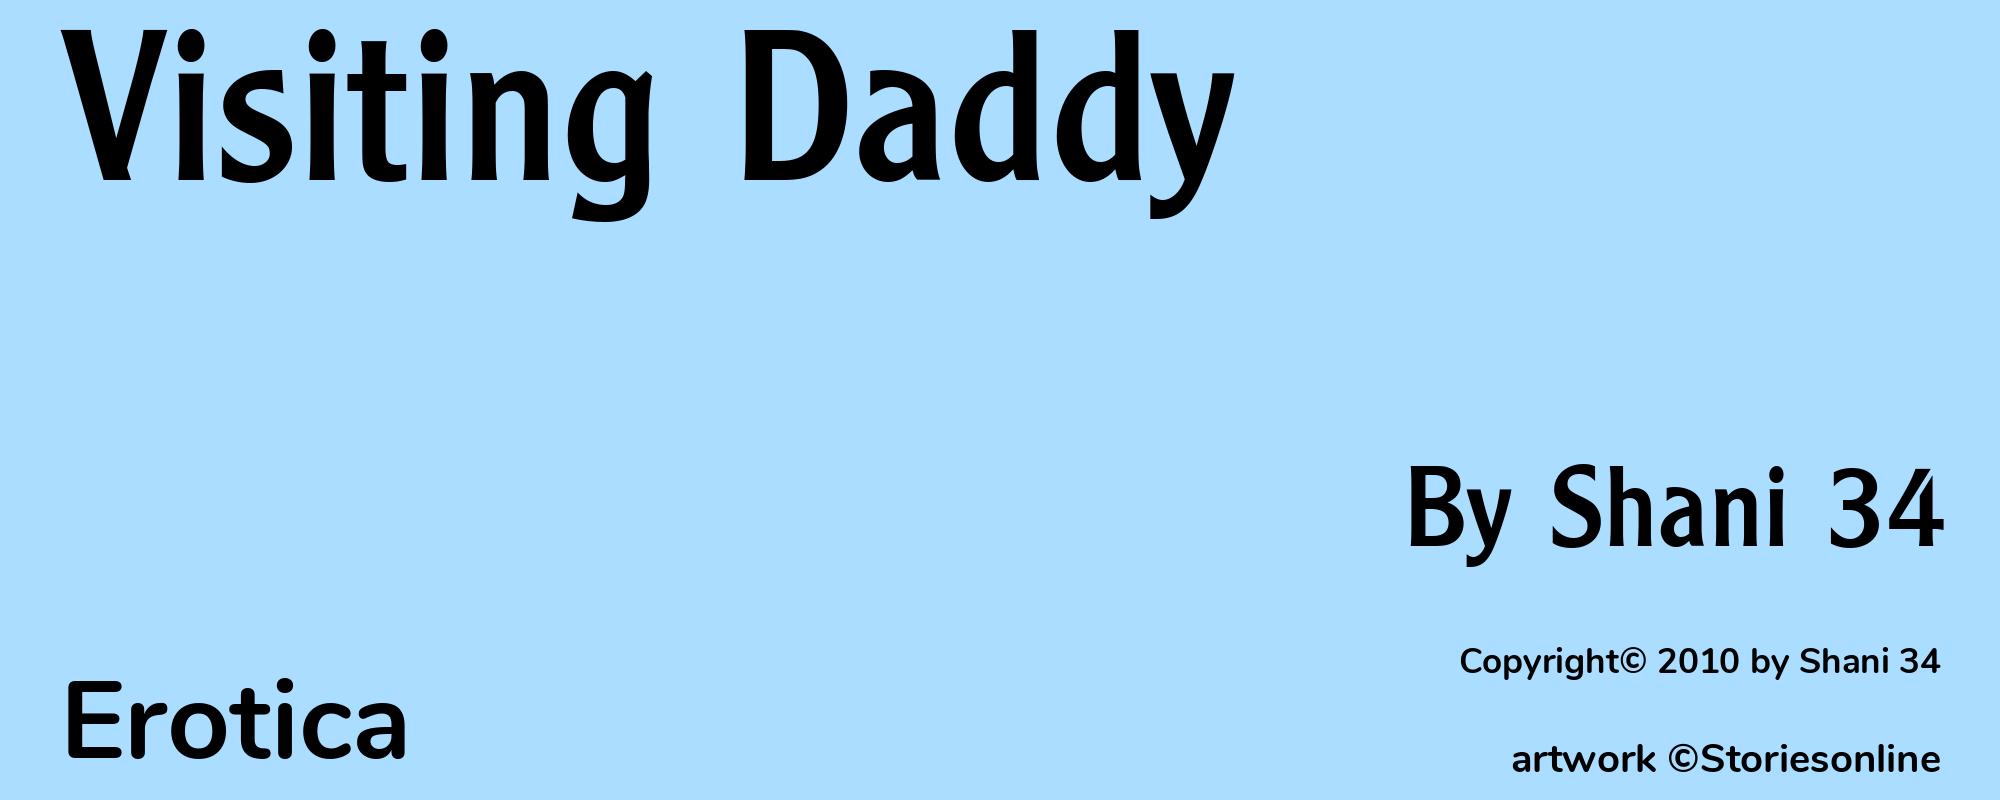 Visiting Daddy - Cover